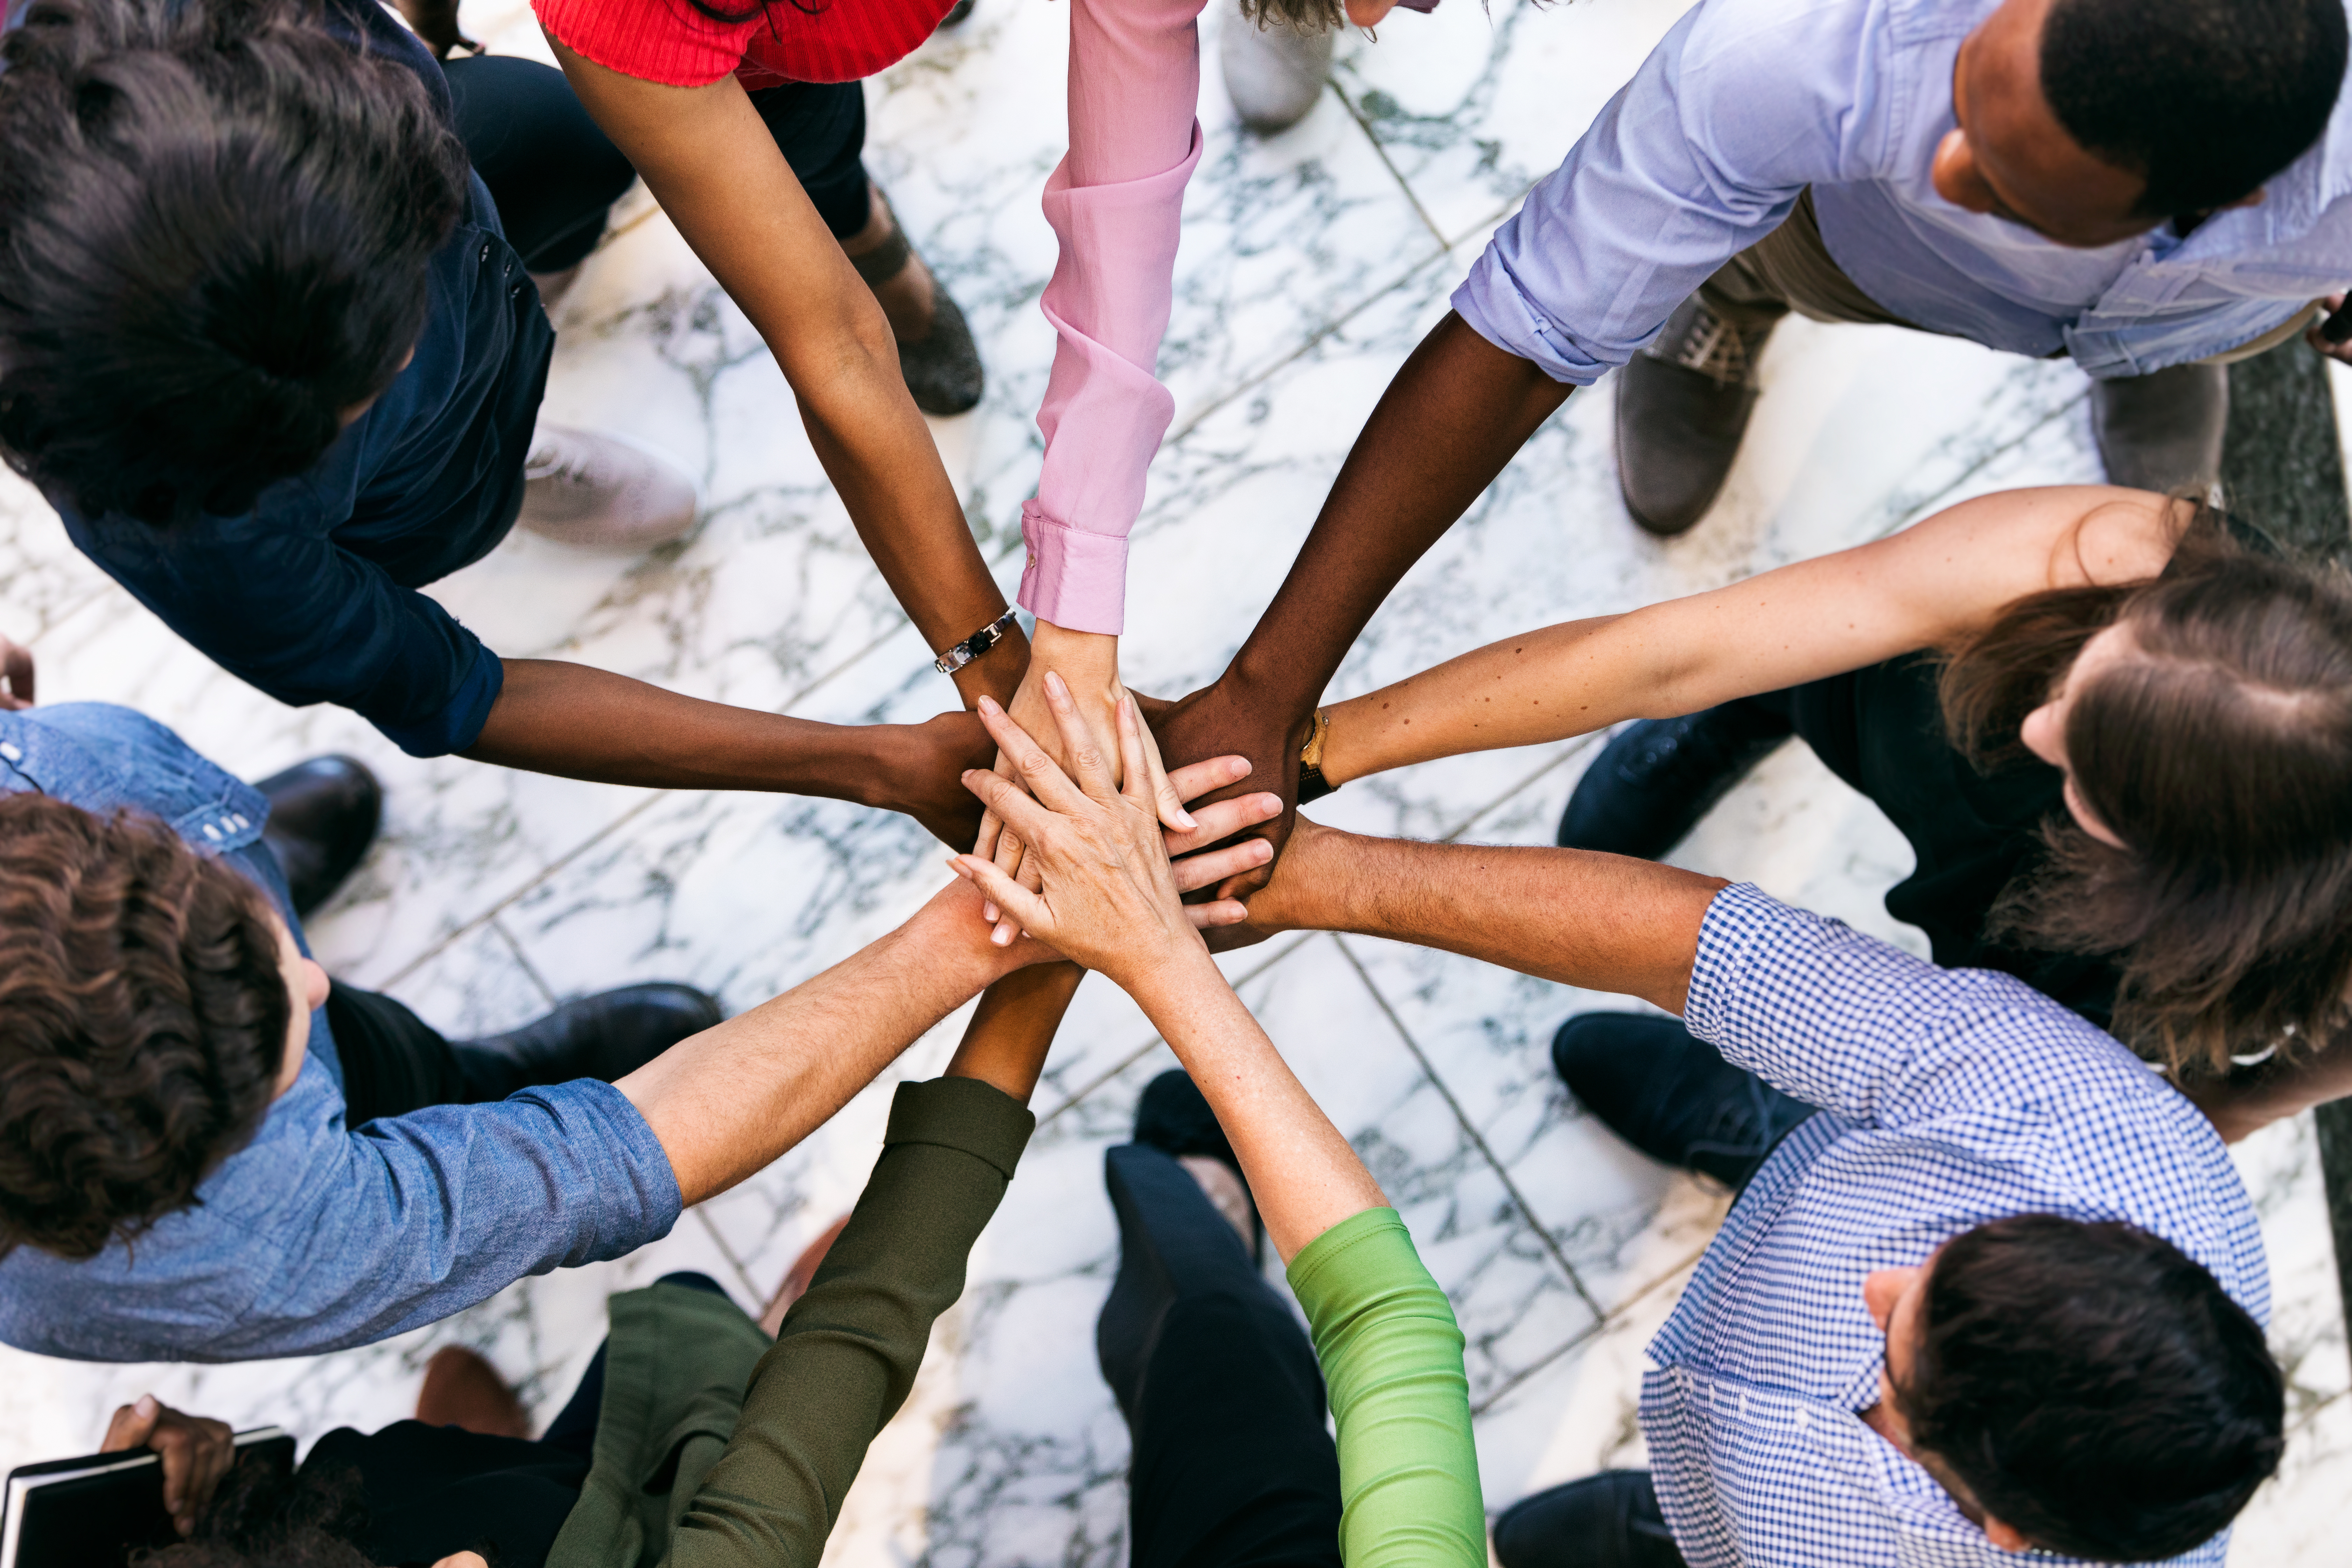 Diverse group of people standing together in a circle, with their hands meeting in the center.